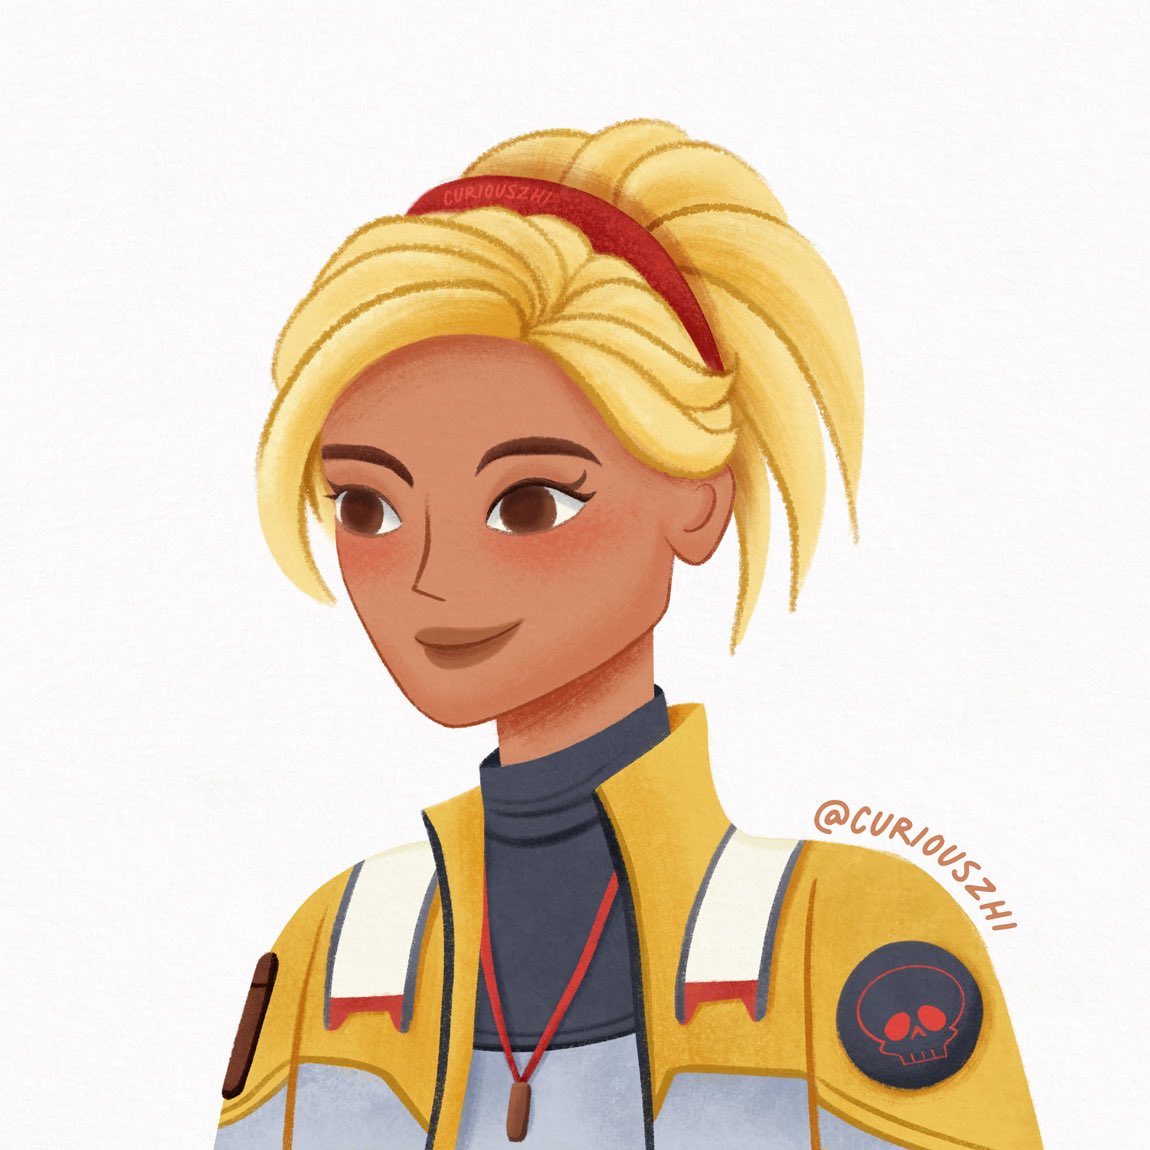 #TheBadBatch - the show may have ended but the fanart won’t! I love that we got to see adult Omega going off to join the Rebellion as a pilot (Tech would be so proud 🥹😭) so I had to draw her! 💛 #TheBadBatchFanArt